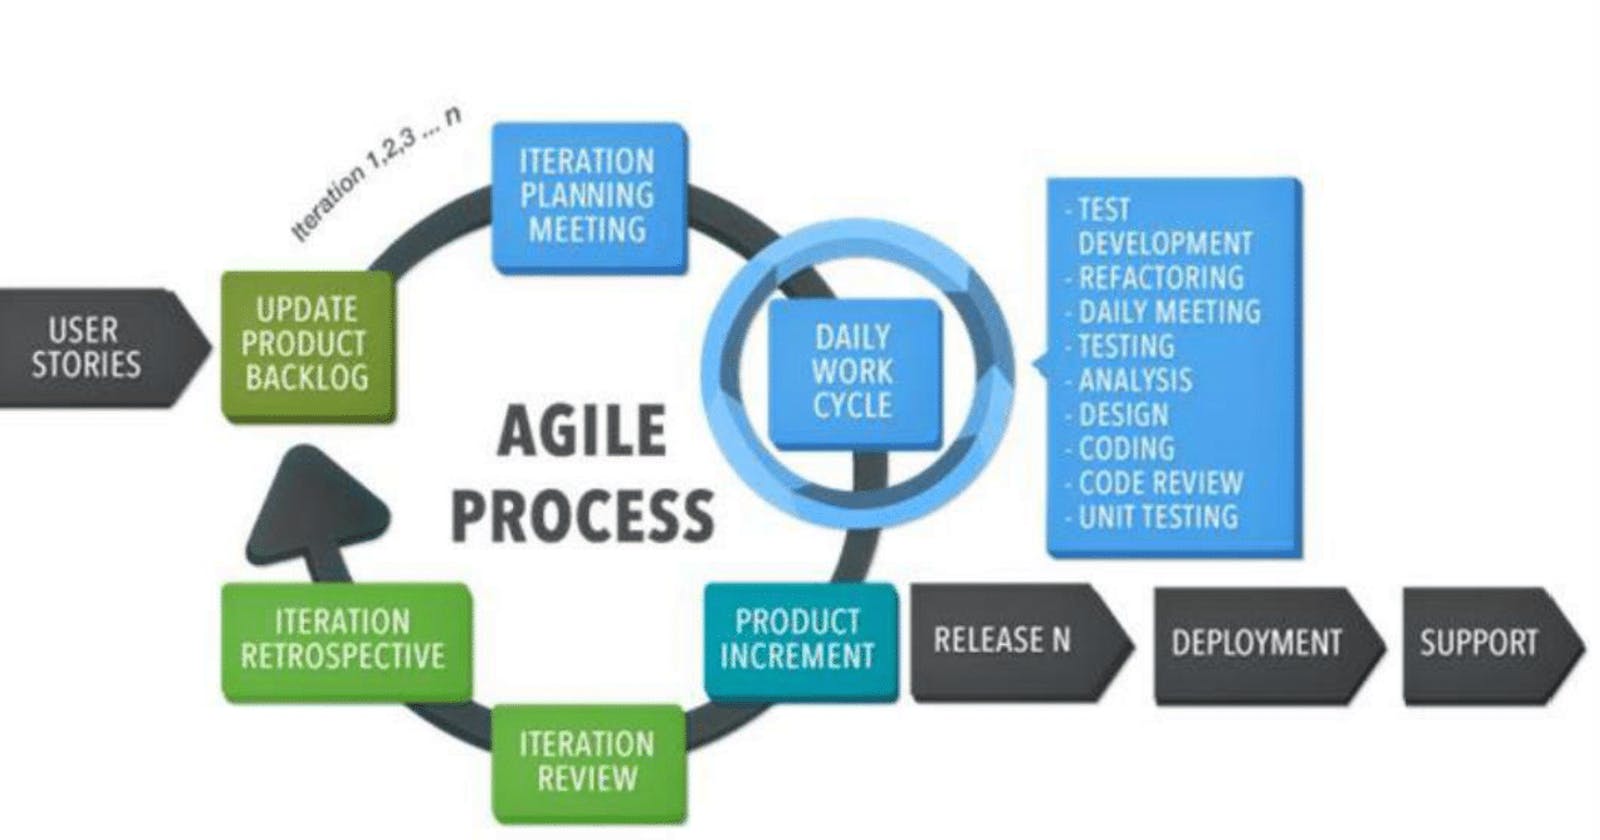 AgileScrum-Blog#02 The need for Technical User Stories and Who Should Prioritize these?